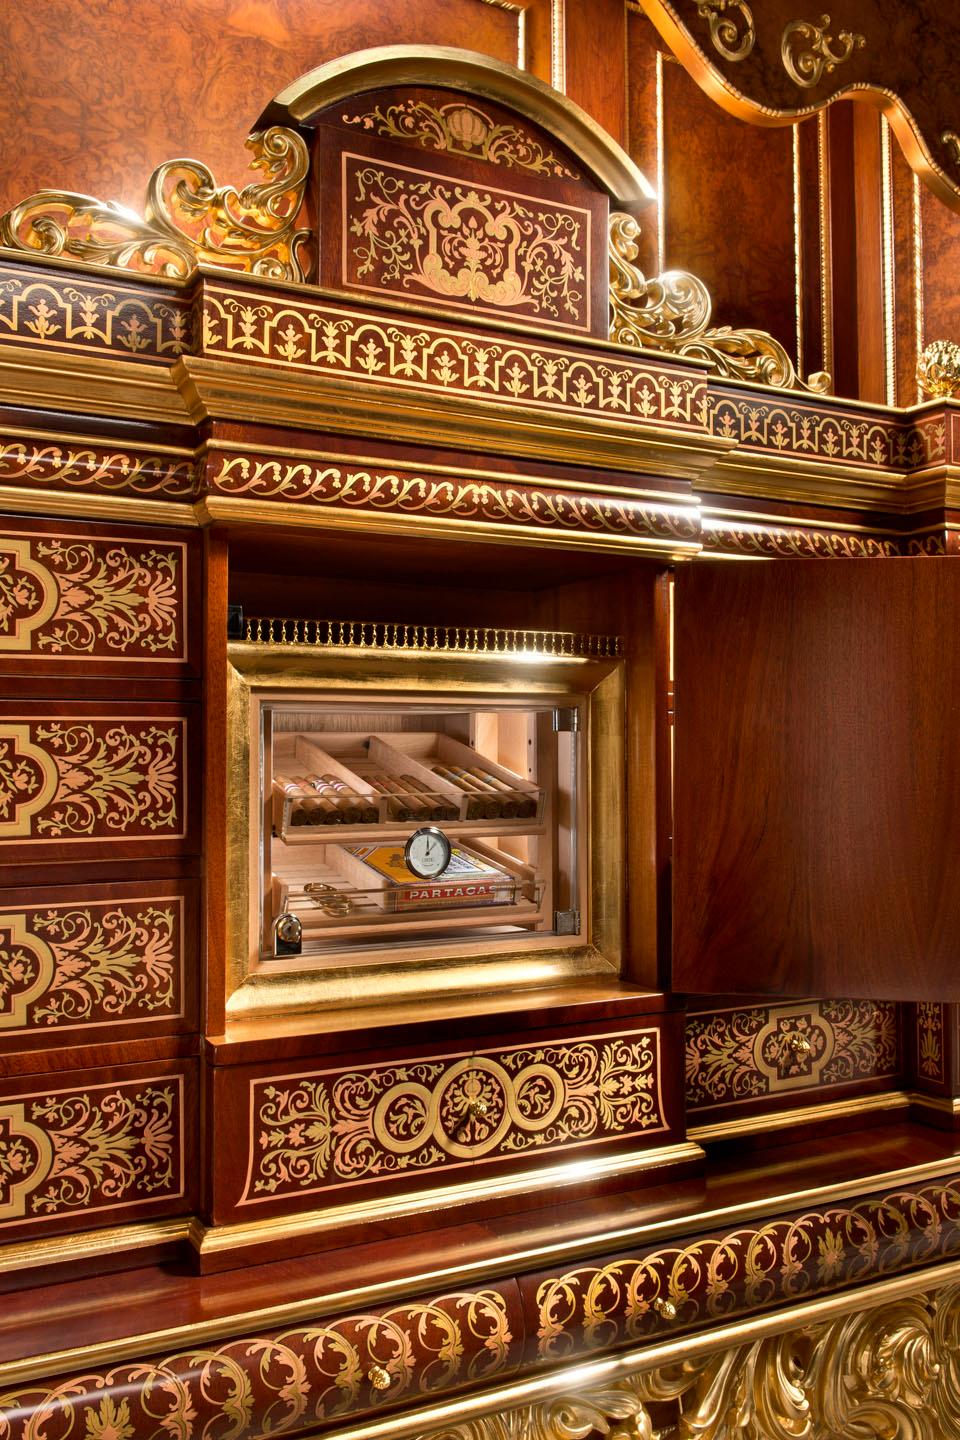 Massive Cigar cabinet with a solid wood high-end luxury structure decorated with breathtaking hand carved squiggles featuring shiny gold leaf applications. 
The upper wooden case presents a 9-drawers dark walnut inlay and hand-painted baroque